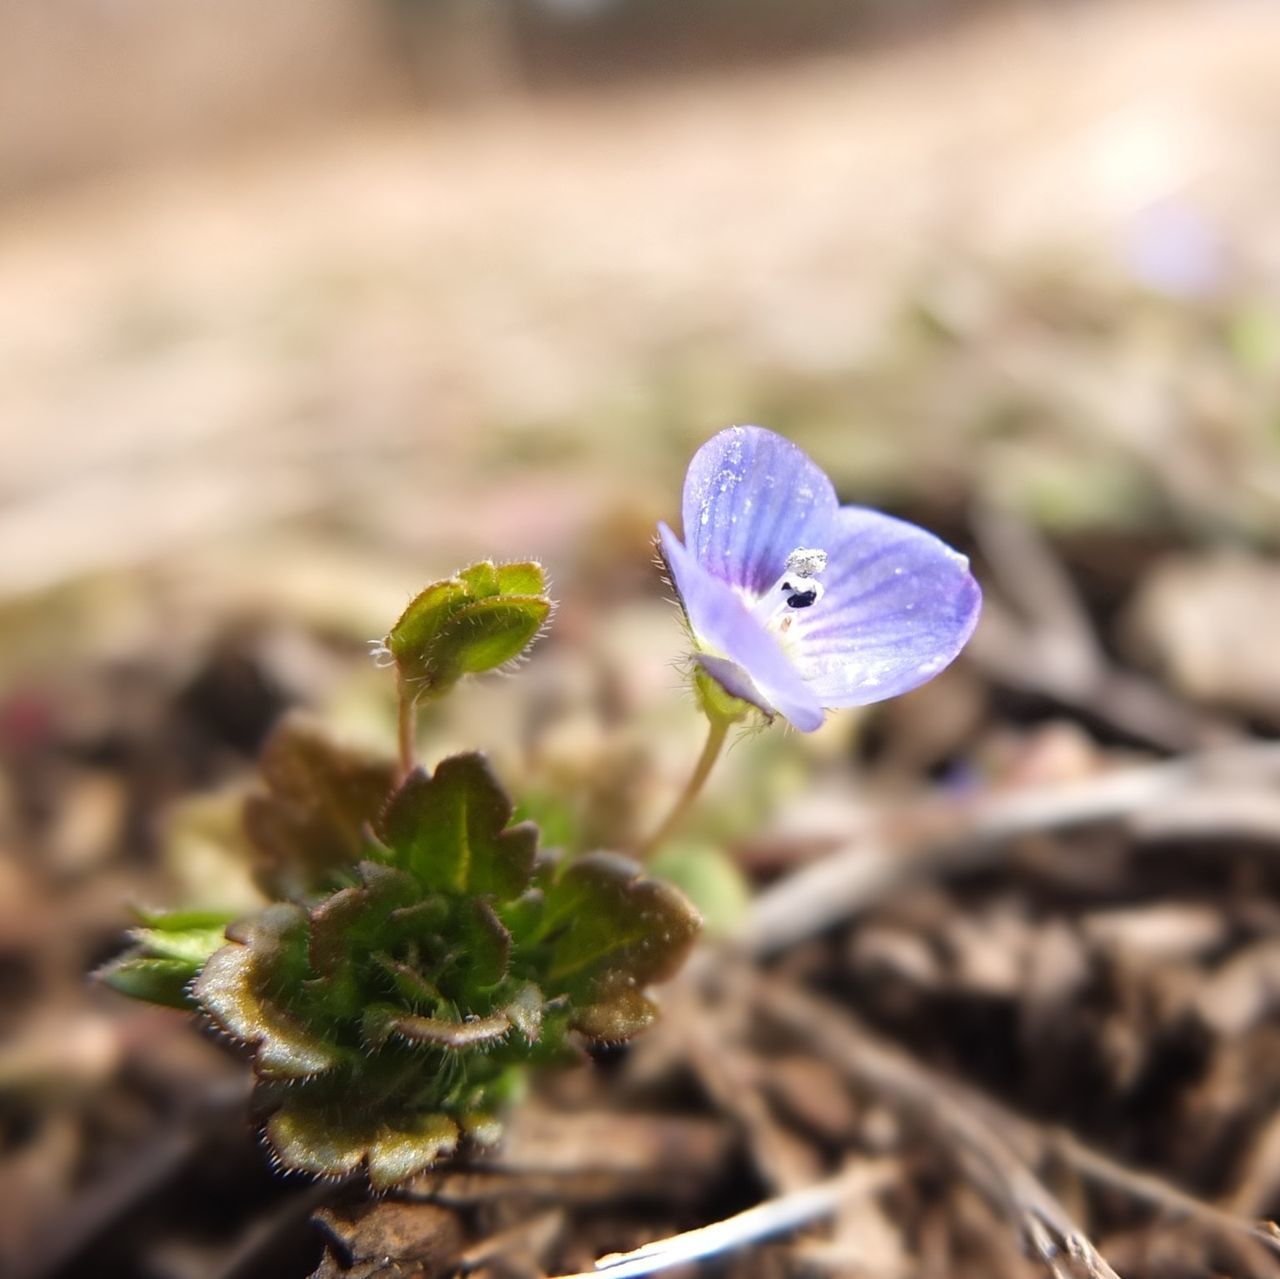 blue, purple, focus on foreground, close-up, plant, growth, nature, fragility, beauty in nature, flower, selective focus, leaf, green color, freshness, day, stem, outdoors, one animal, no people, new life